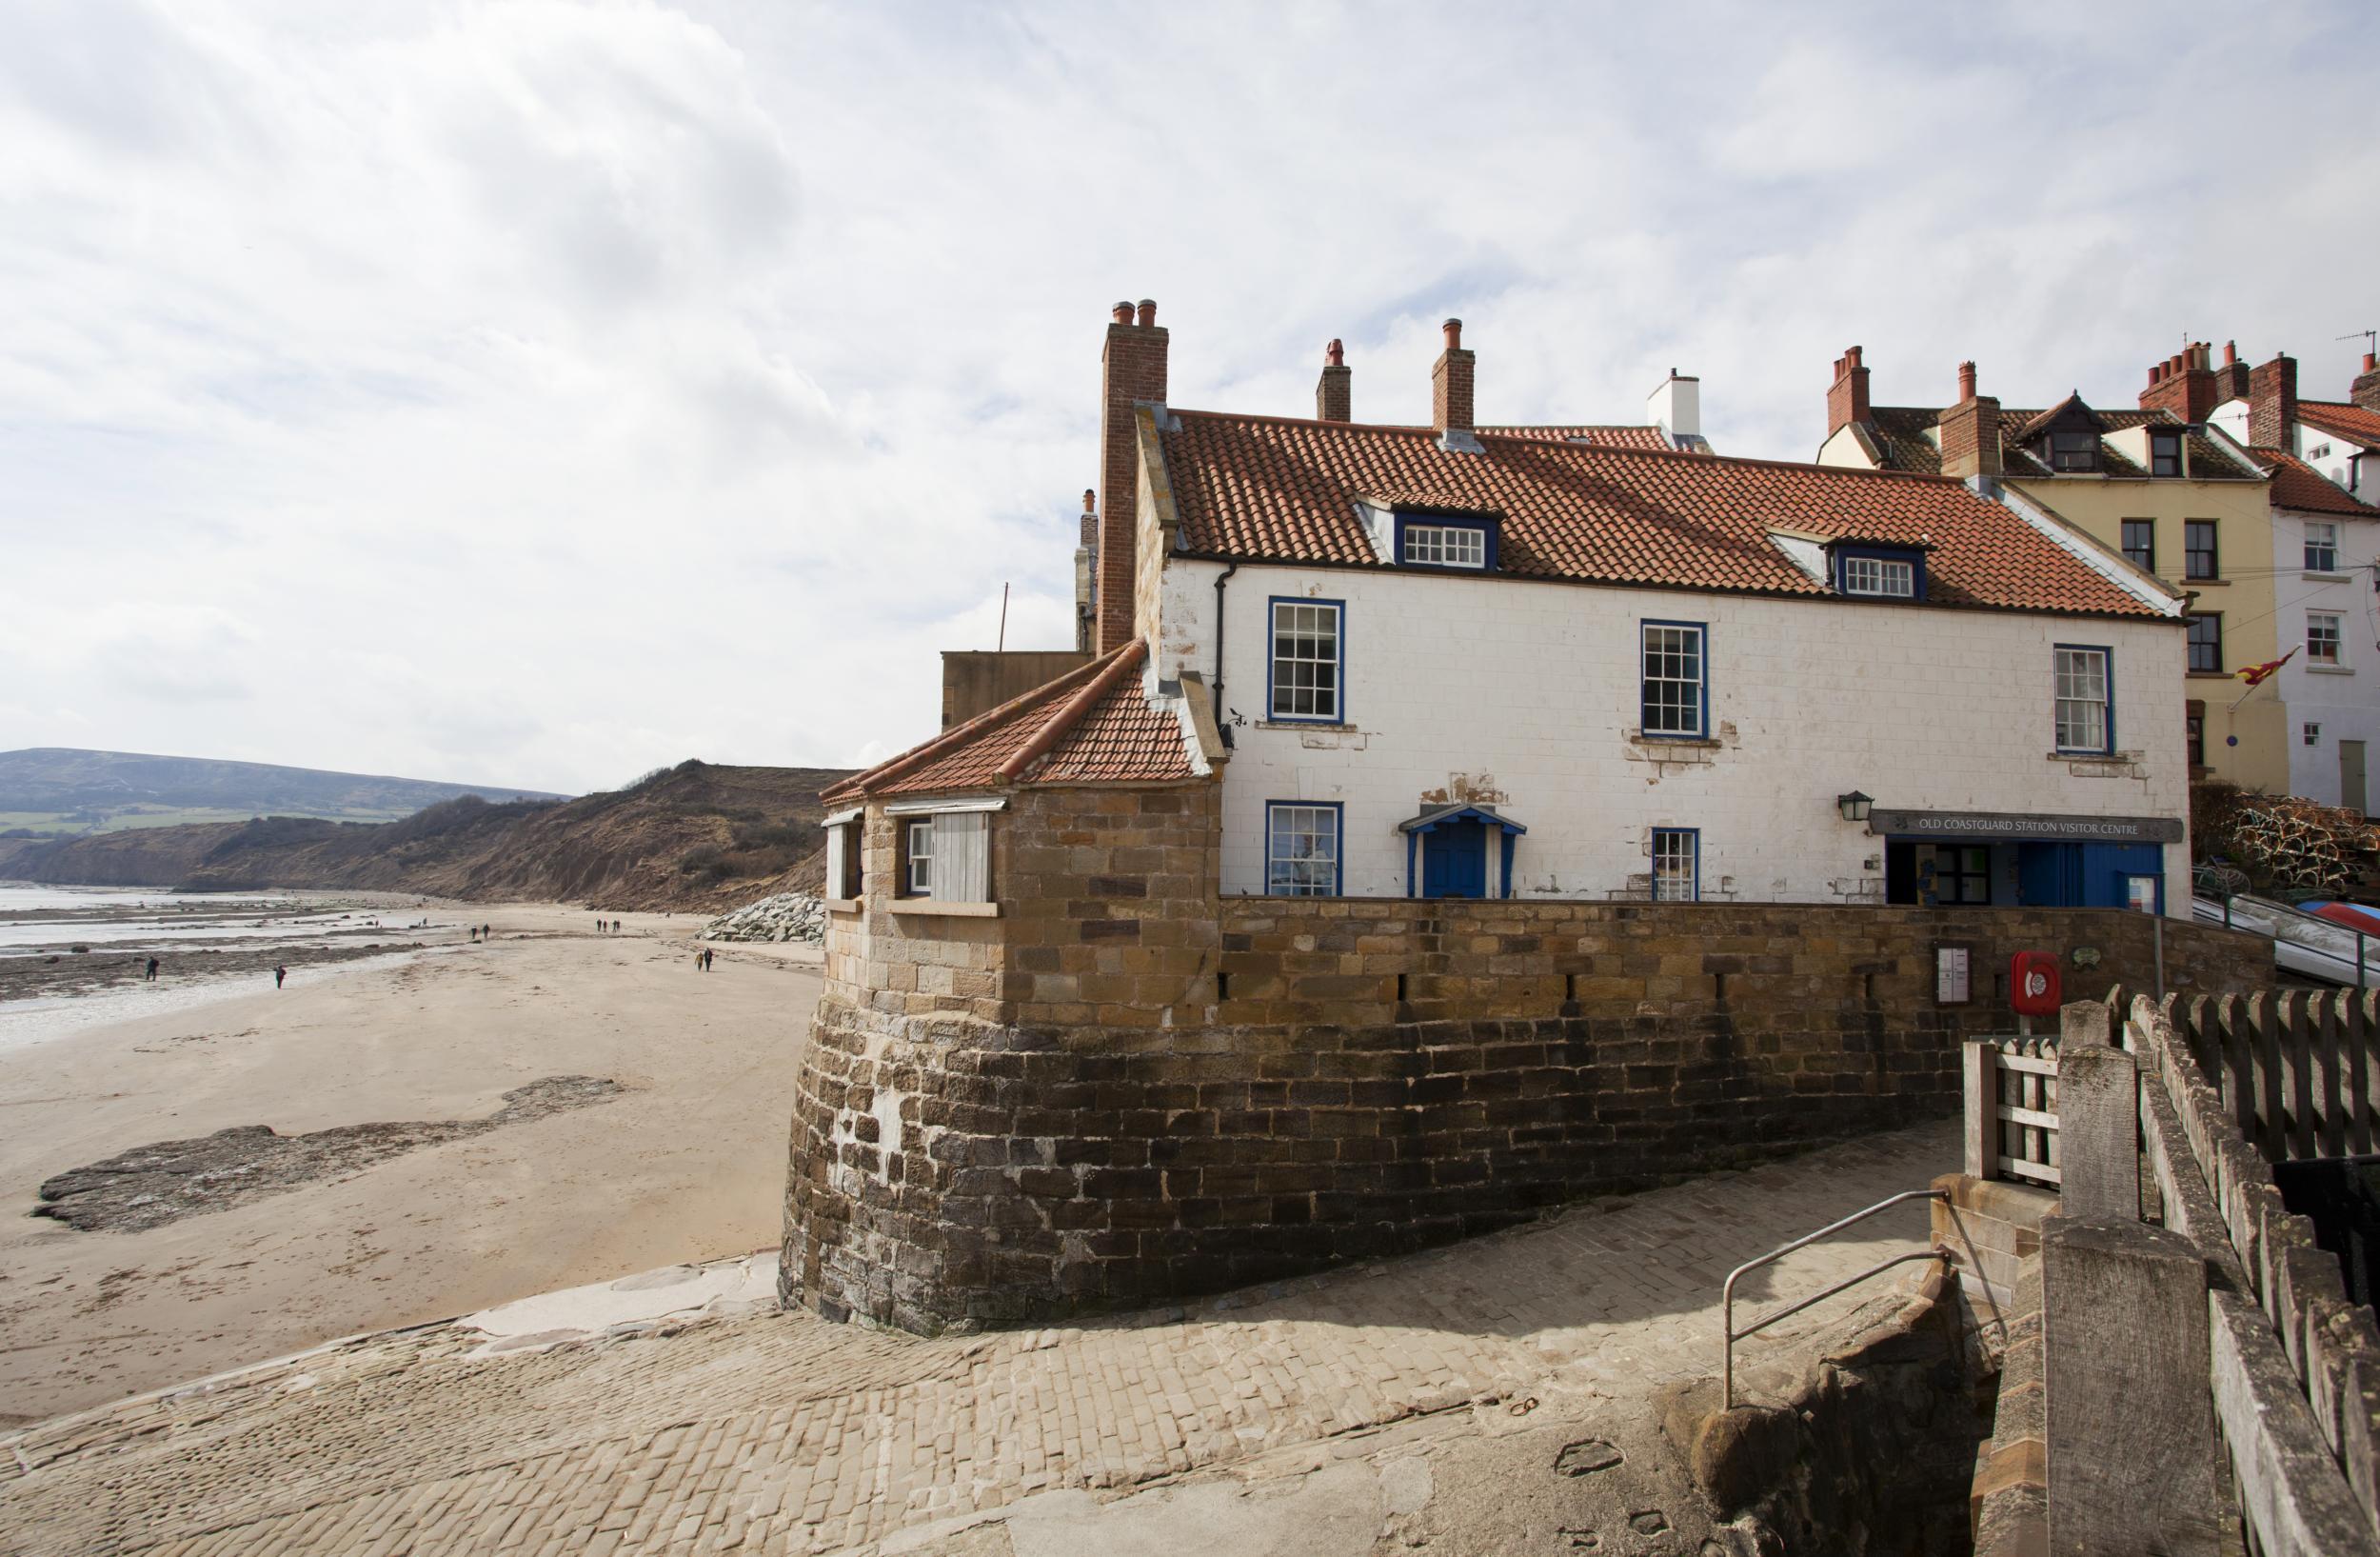 The Boatman's Loft is situated six miles up the coast from Whitby